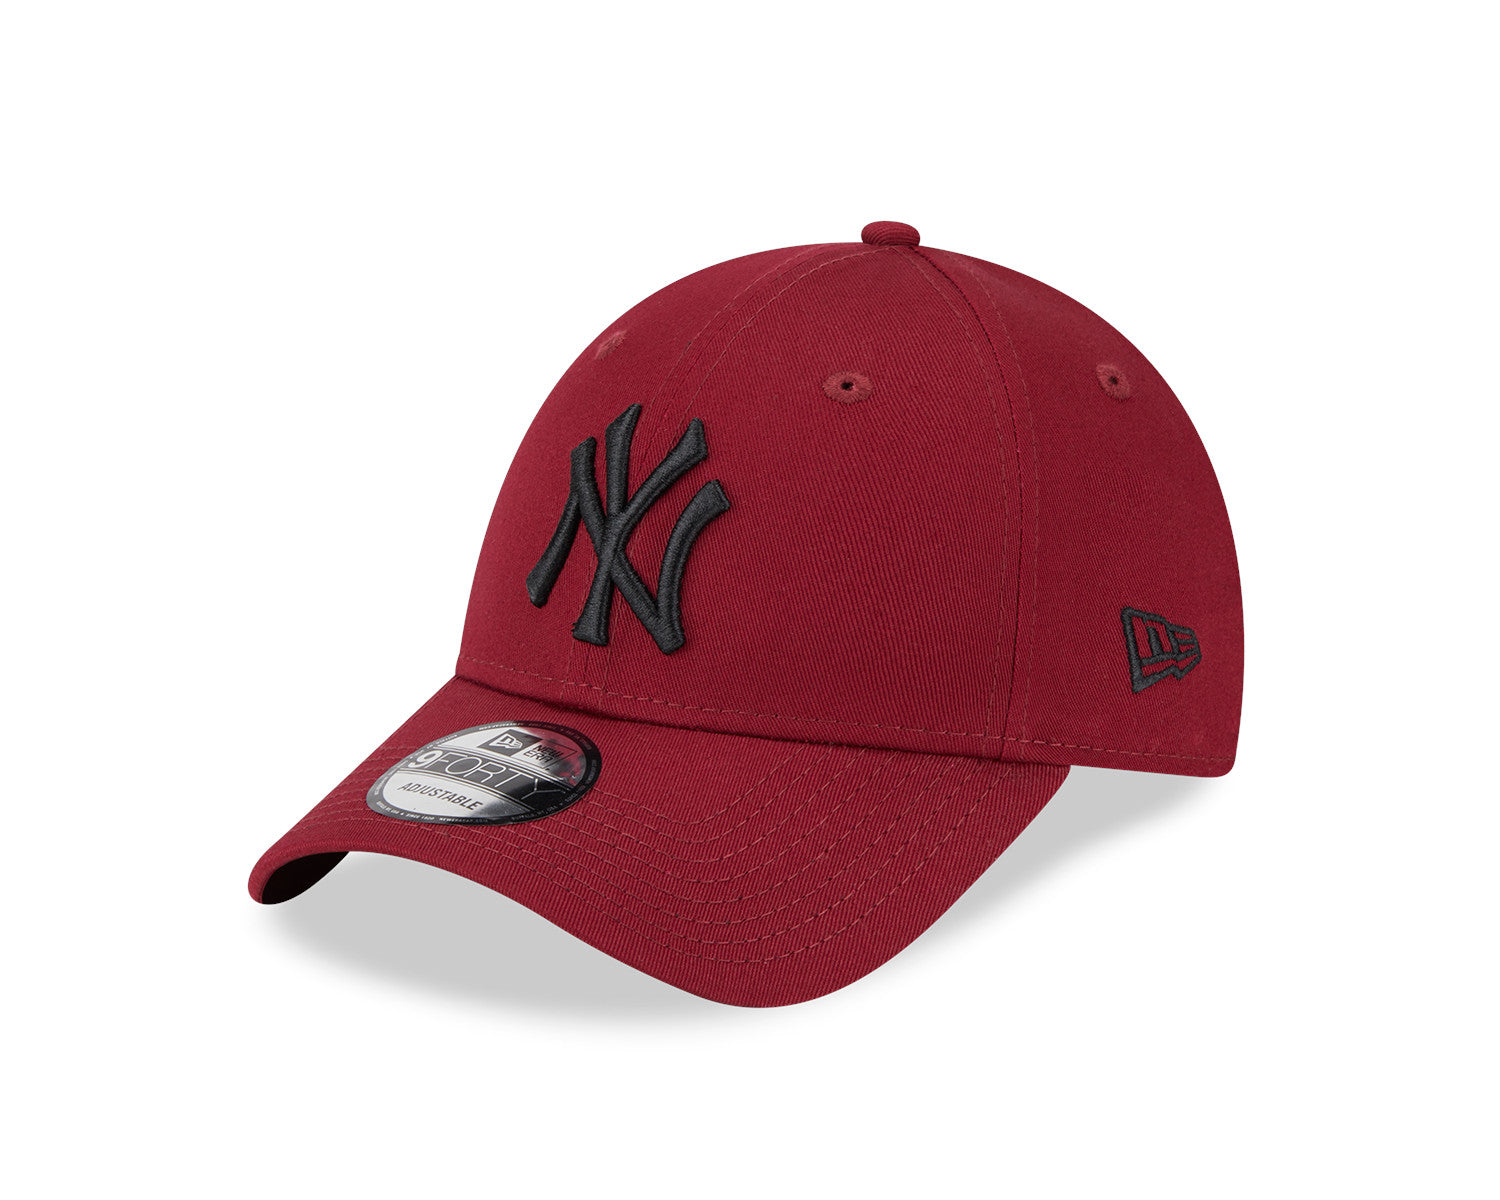 NEW ERA 9FORTY MLB NEW YORK YANKEES LEAGUE ESSENTIAL RED CAP